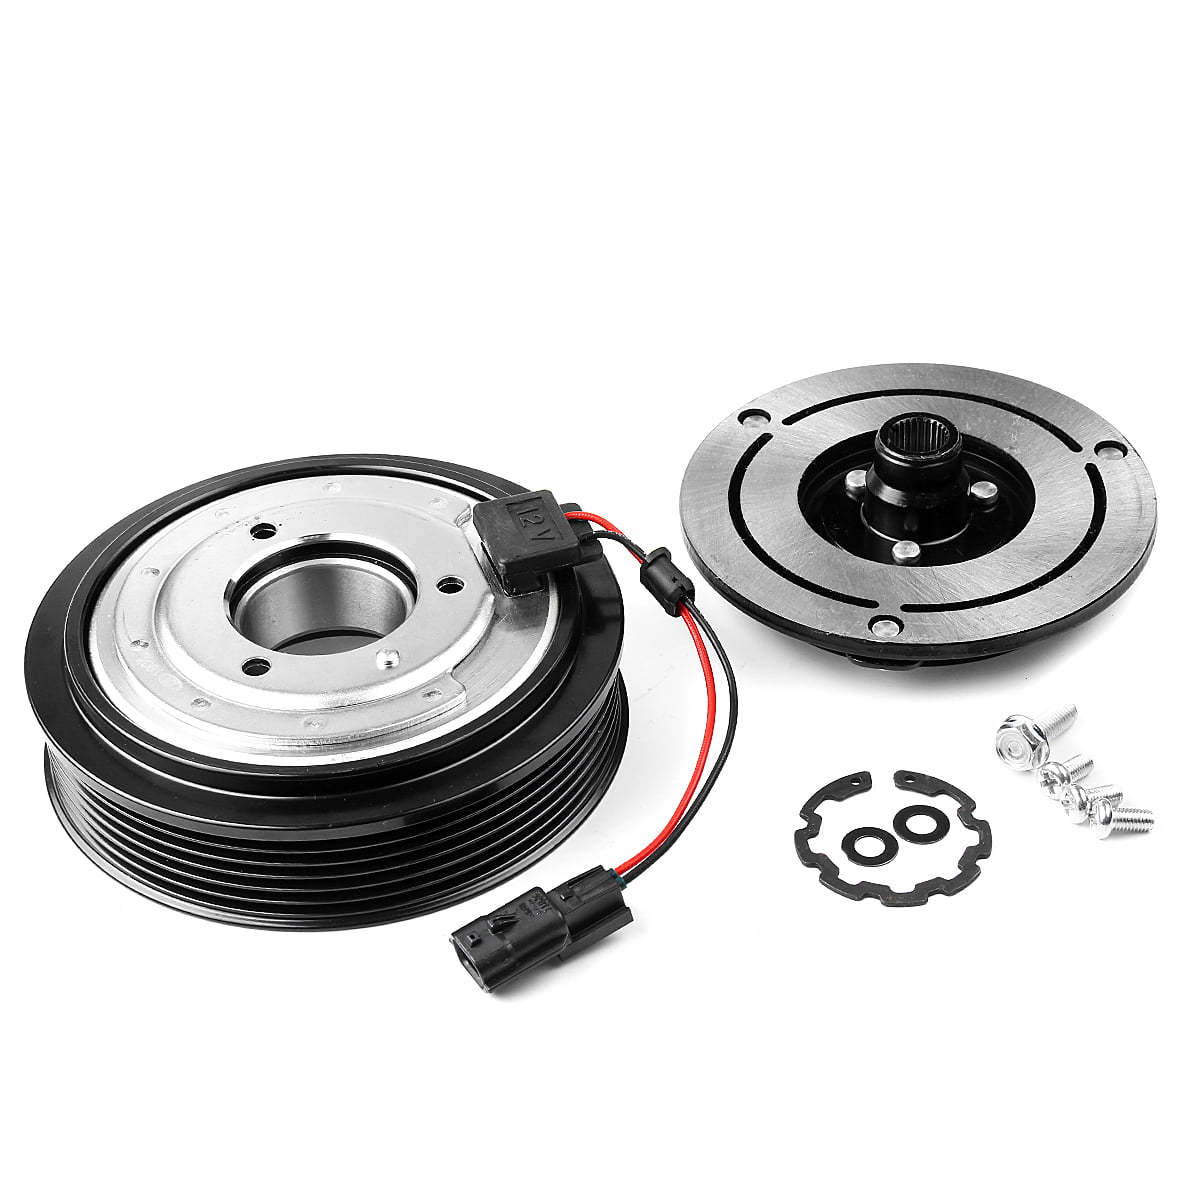 2007-2013 Ford Expedition 5.4 CoolTech AC Compressor Clutch KIT Coil Pulley Plate FITS 